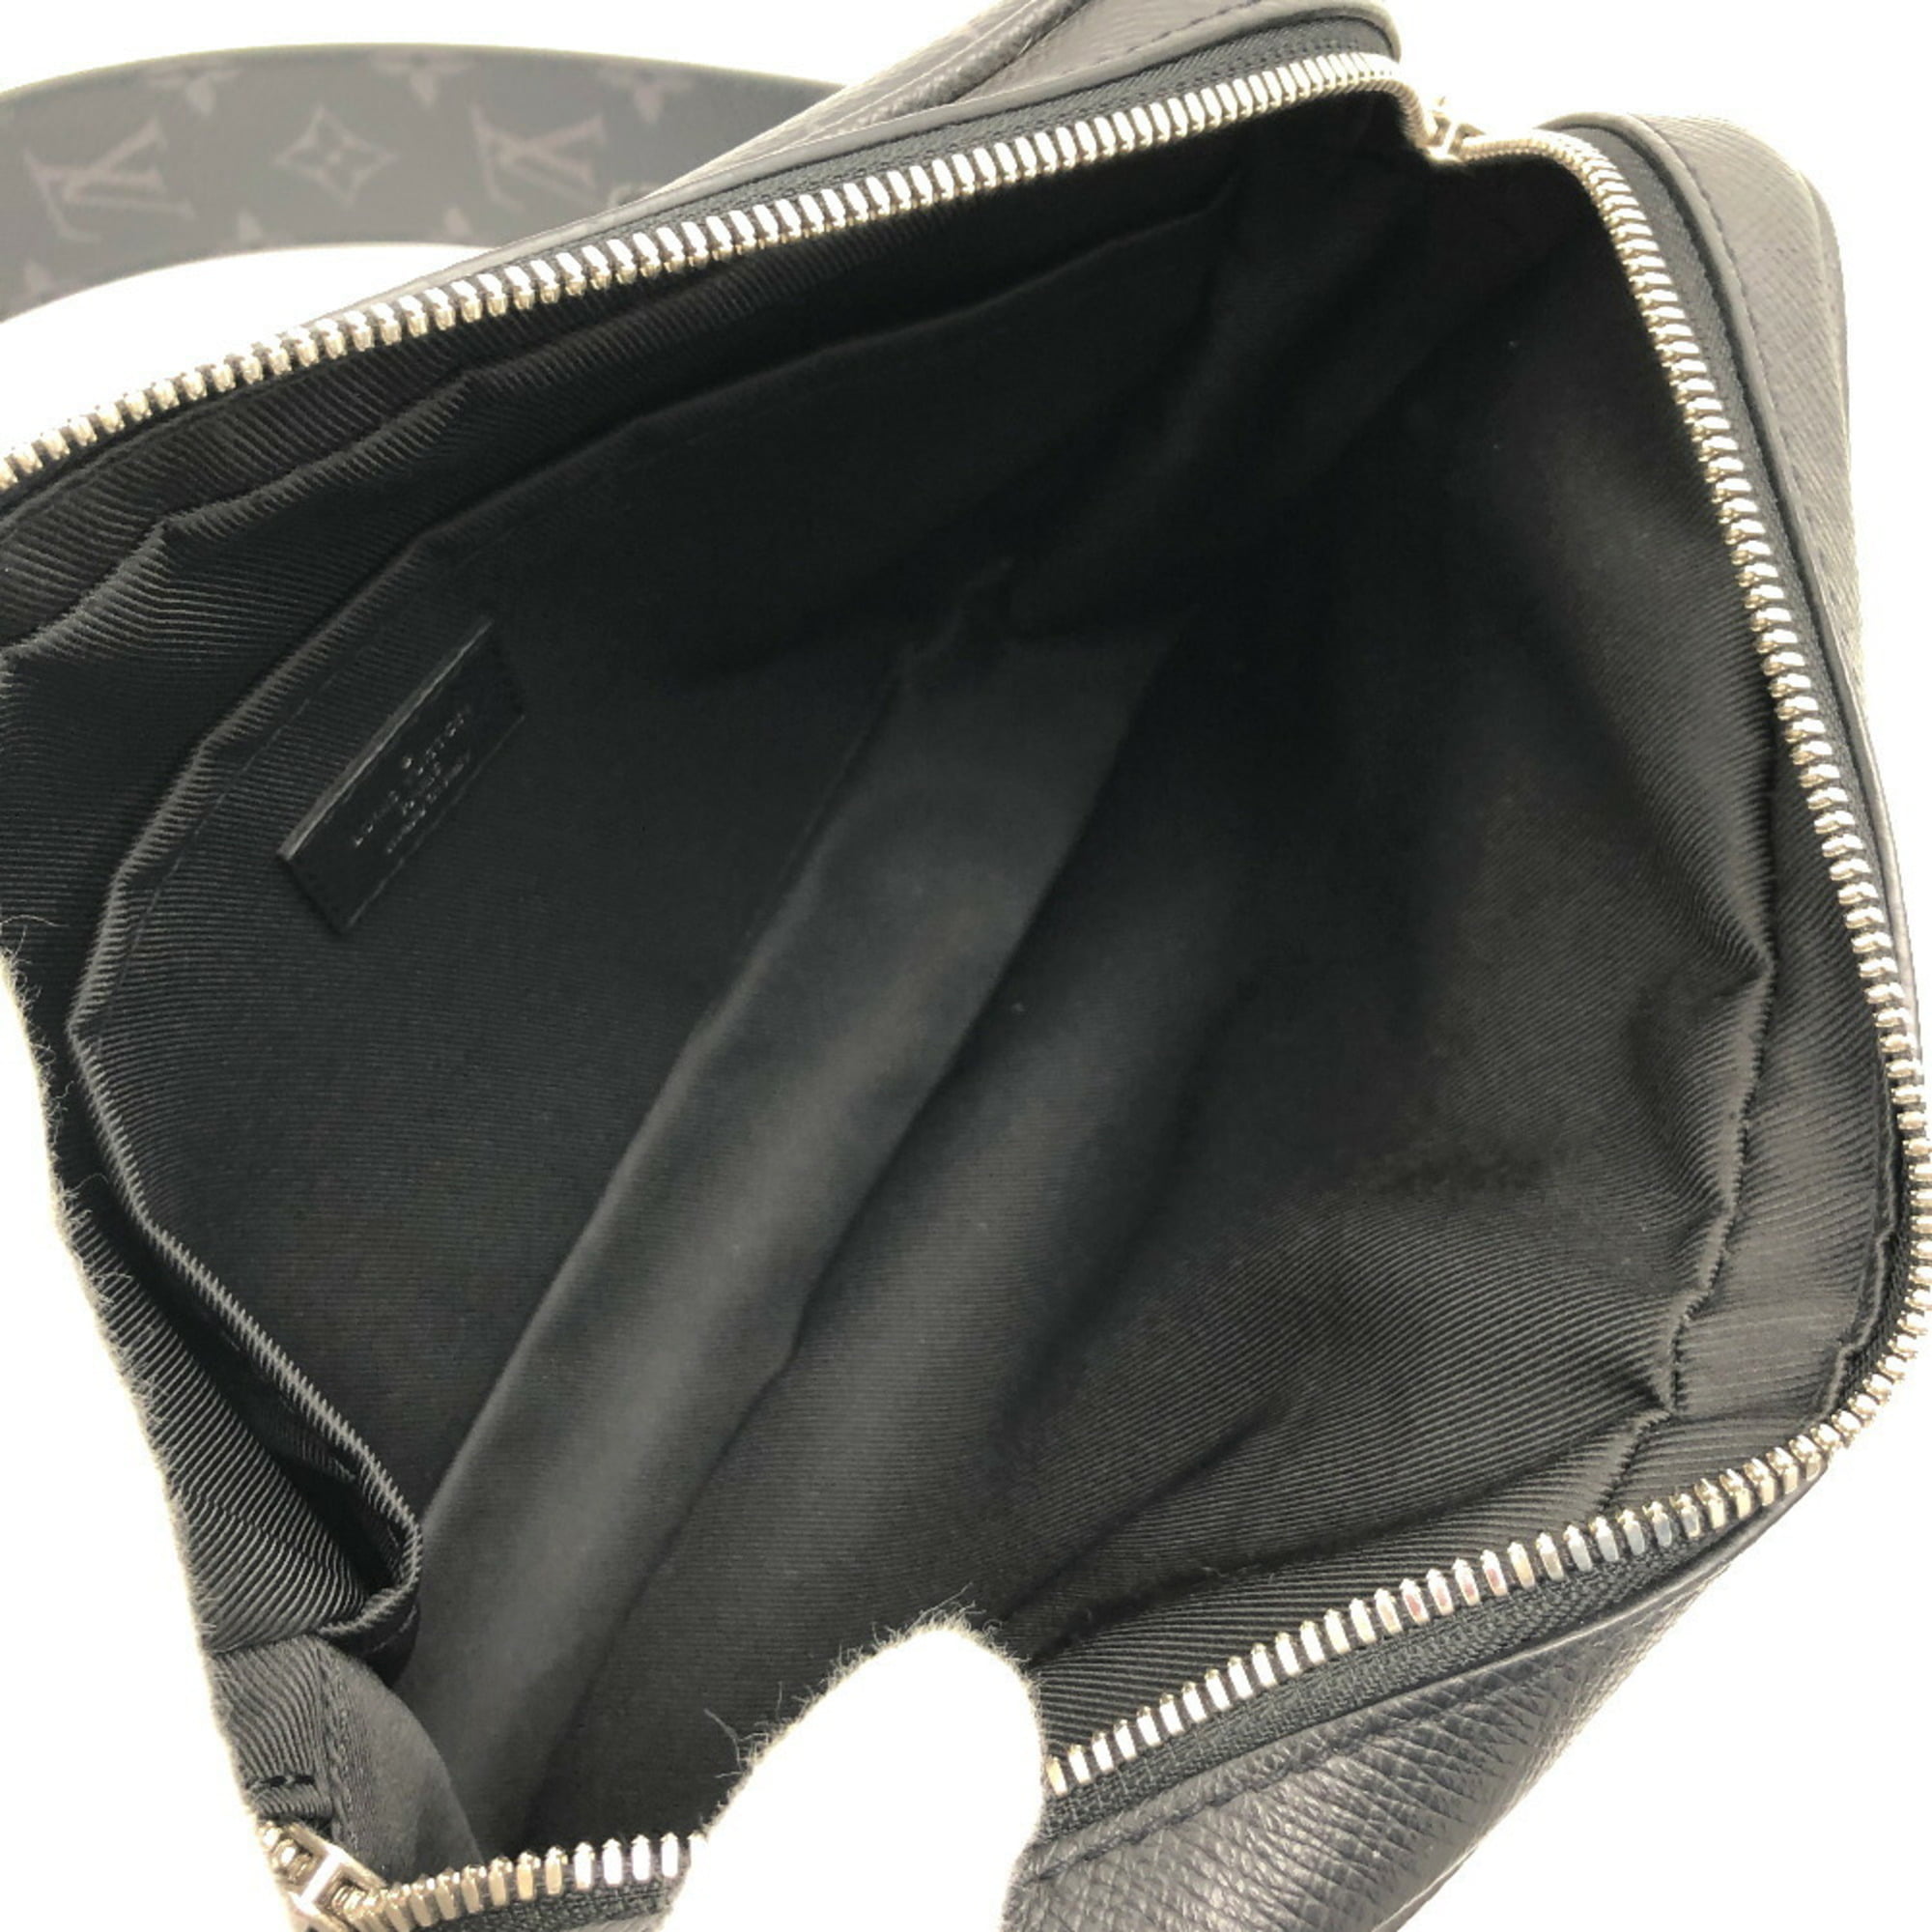 LOUIS VUITTON LOUIS VUITTON On My Side 2way Shoulder Bag M53823 canvas Black  Used Women LV M53823｜Product Code：2101216847927｜BRAND OFF Online Store